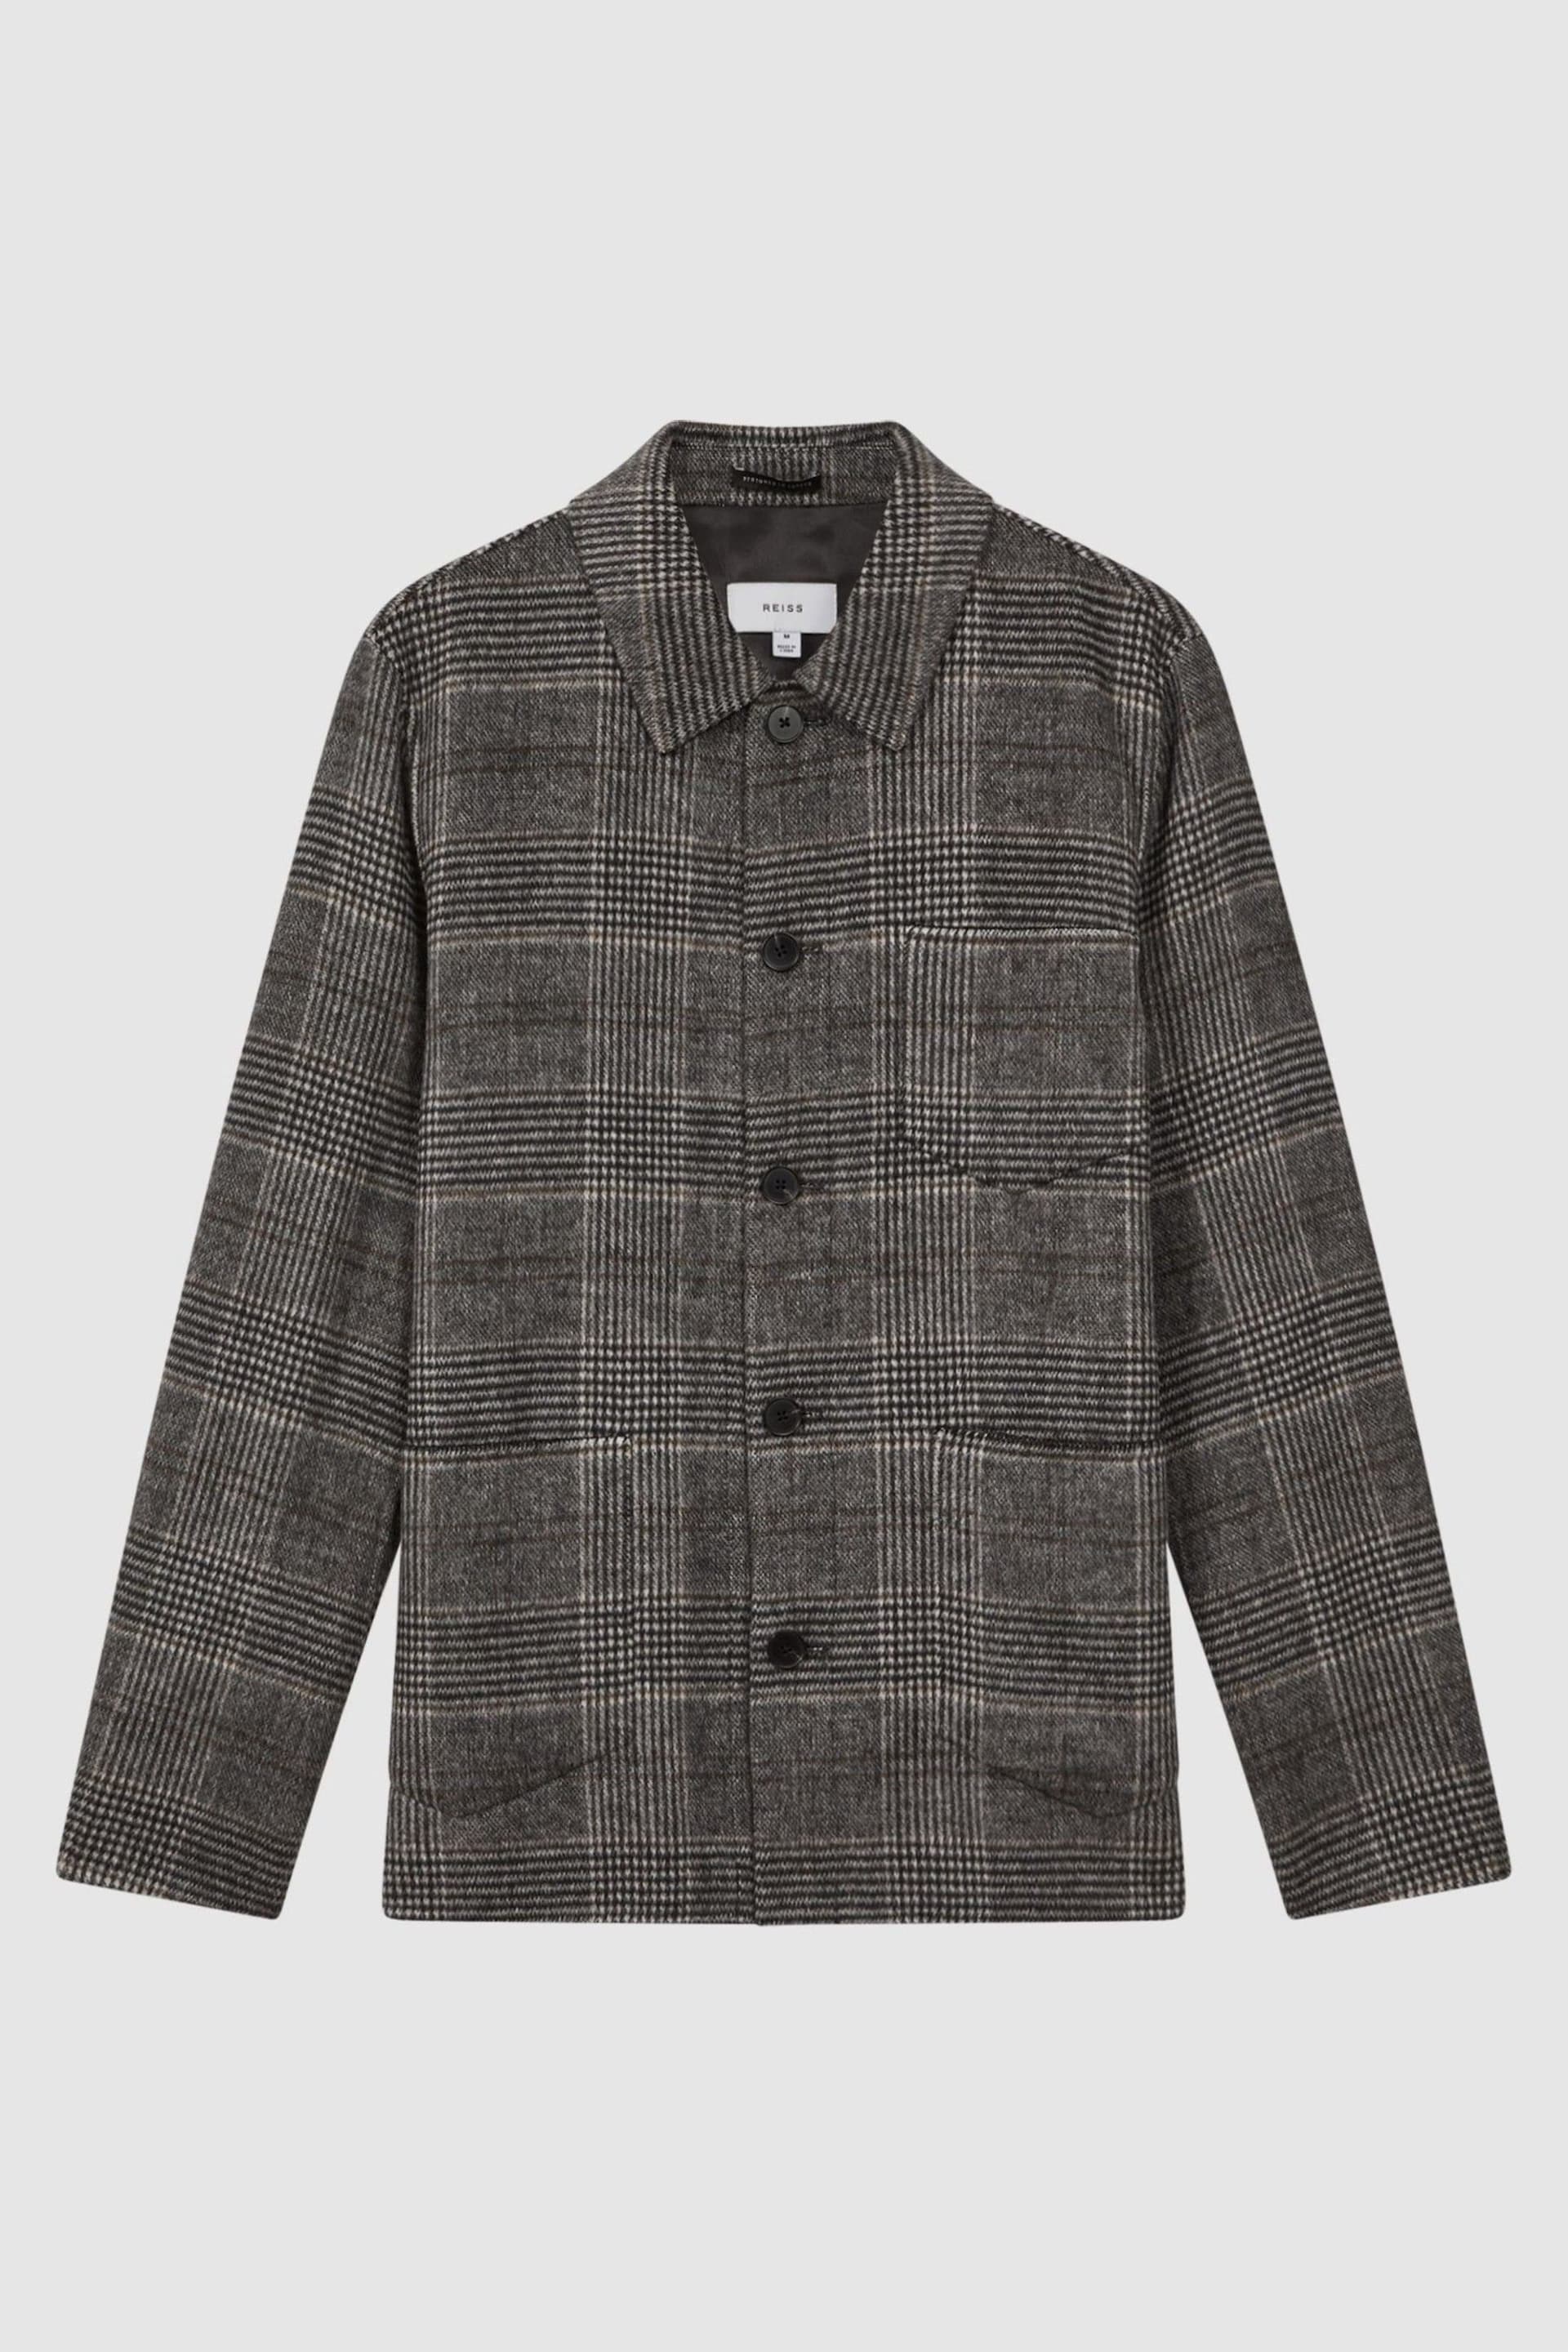 Reiss Charcoal Covert Wool Blend Check Overshirt - Image 2 of 5